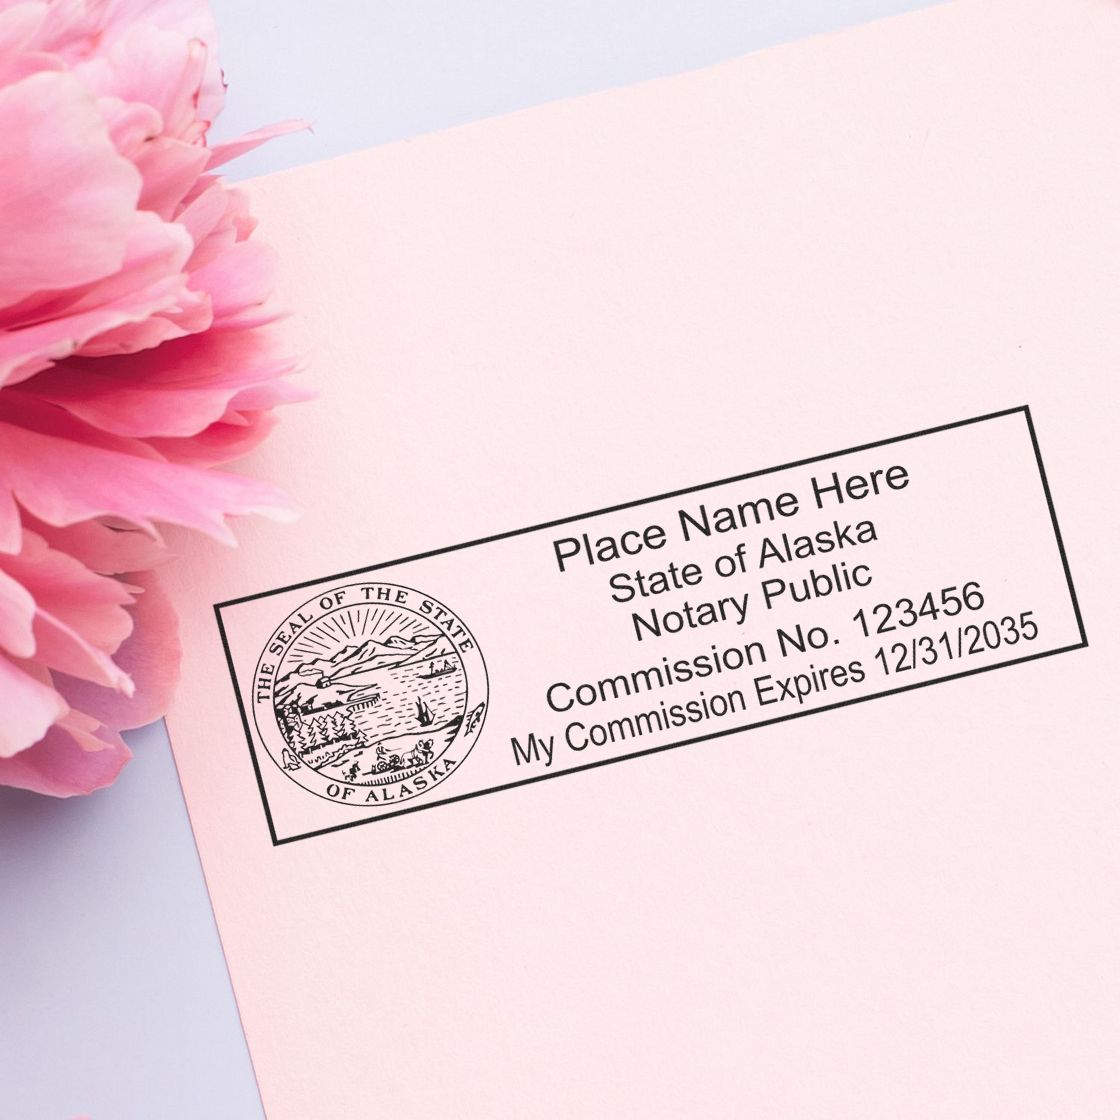 The Super Slim Alaska Notary Public Stamp stamp impression comes to life with a crisp, detailed photo on paper - showcasing true professional quality.